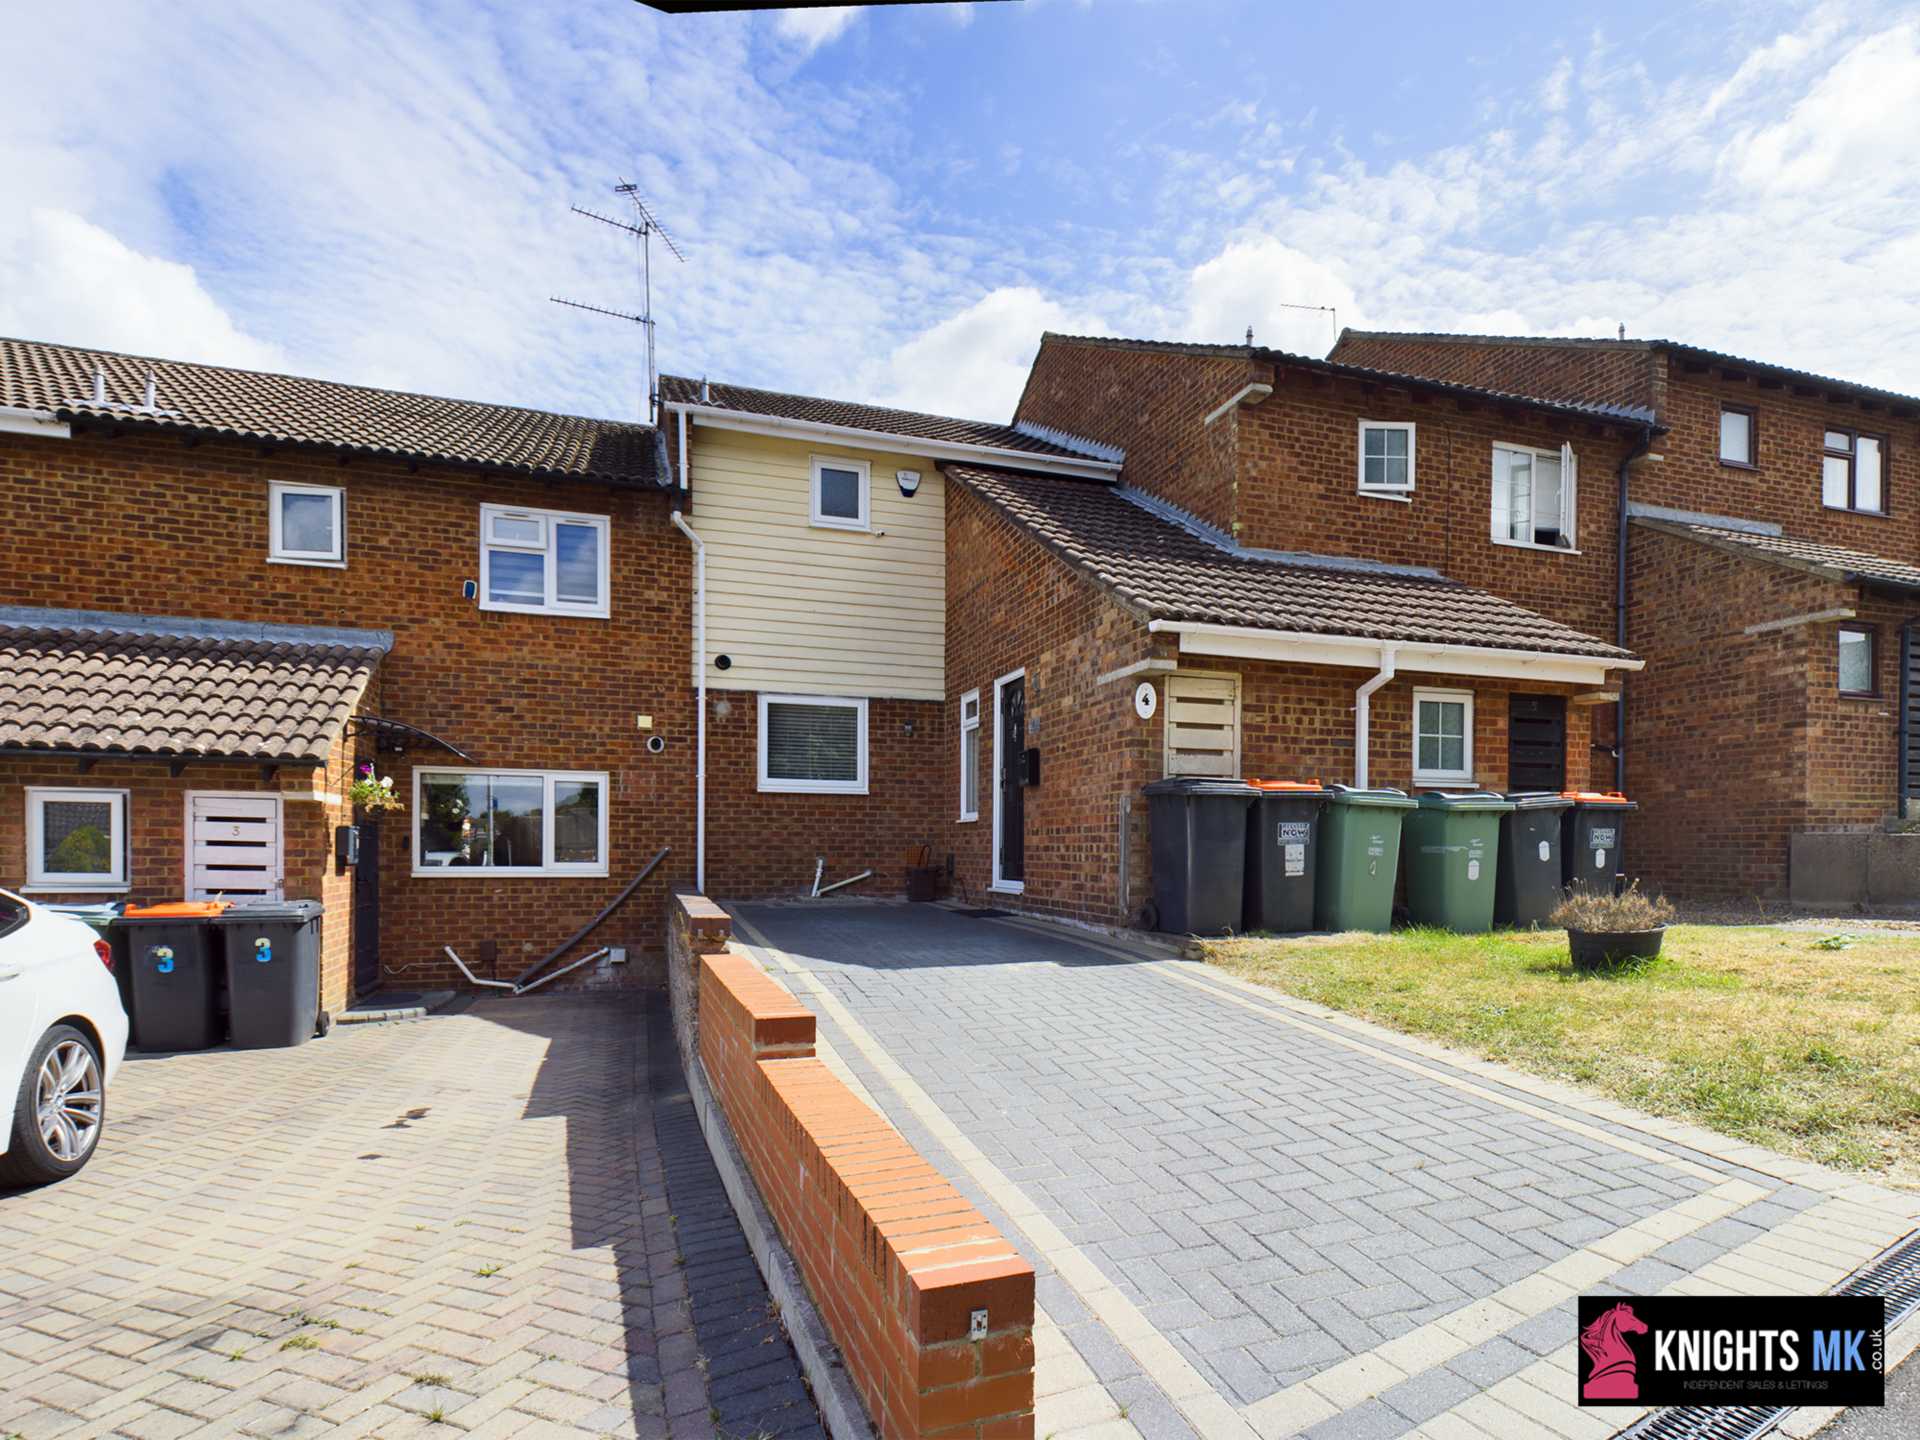 2 bed Mid Terraced House for rent in Dunstable. From Knights Lettings & Property Sales - Milton Keynes